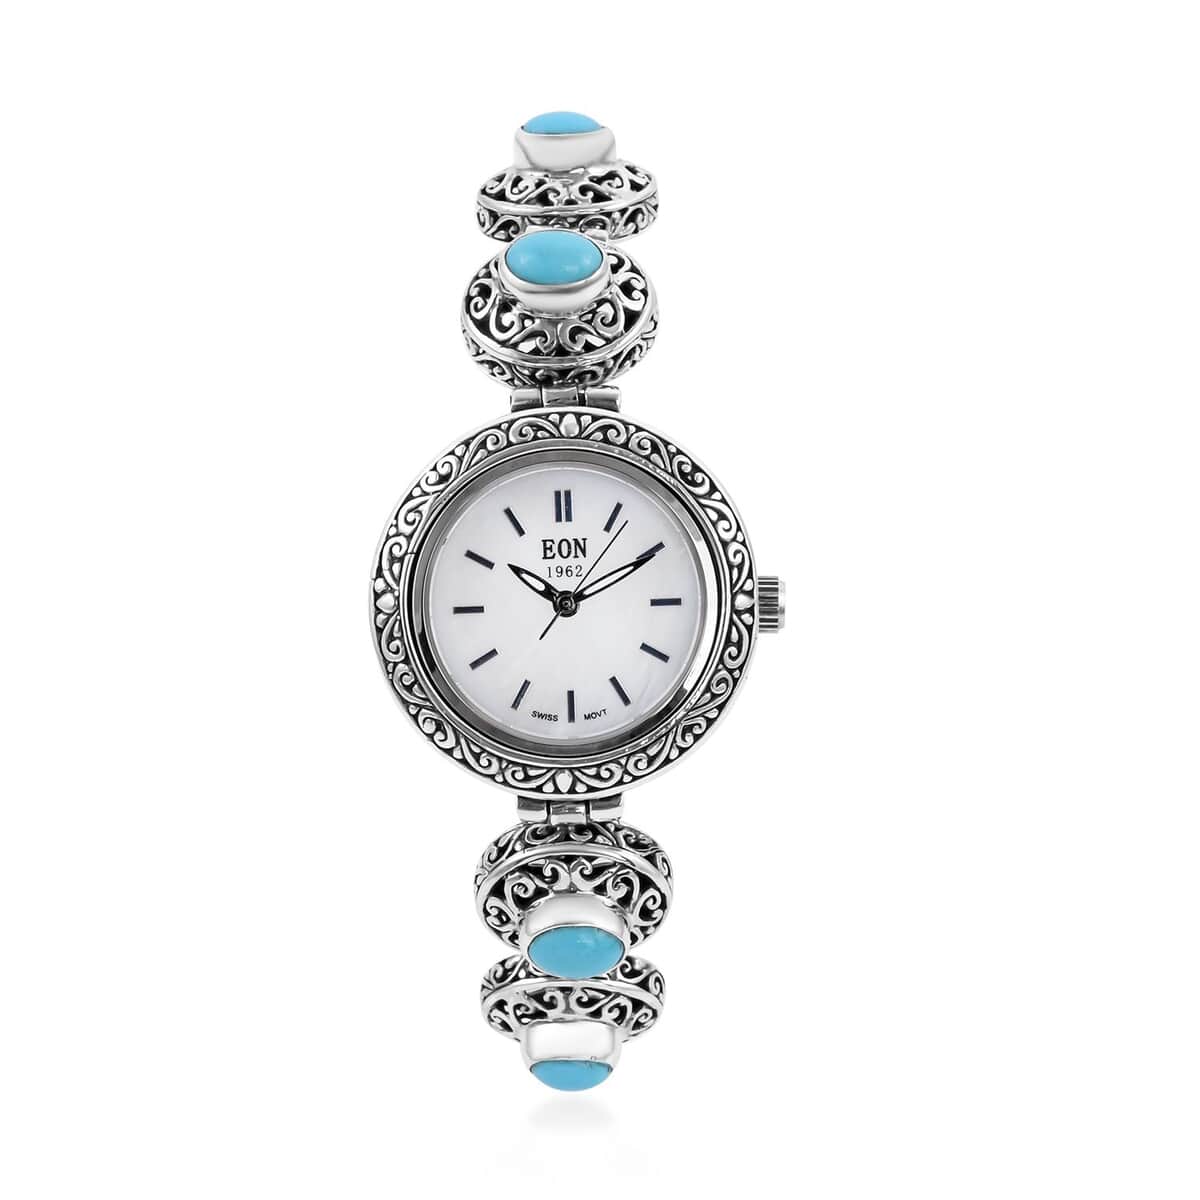 Doorbuster BALI LEGACY EON 1962 American Natural Sleeping Beauty Turquoise Swiss Movement Bracelet Watch in Sterling Silver (7.0-8.0Inches) (26mm) (36 g) 3.70 ctw image number 0